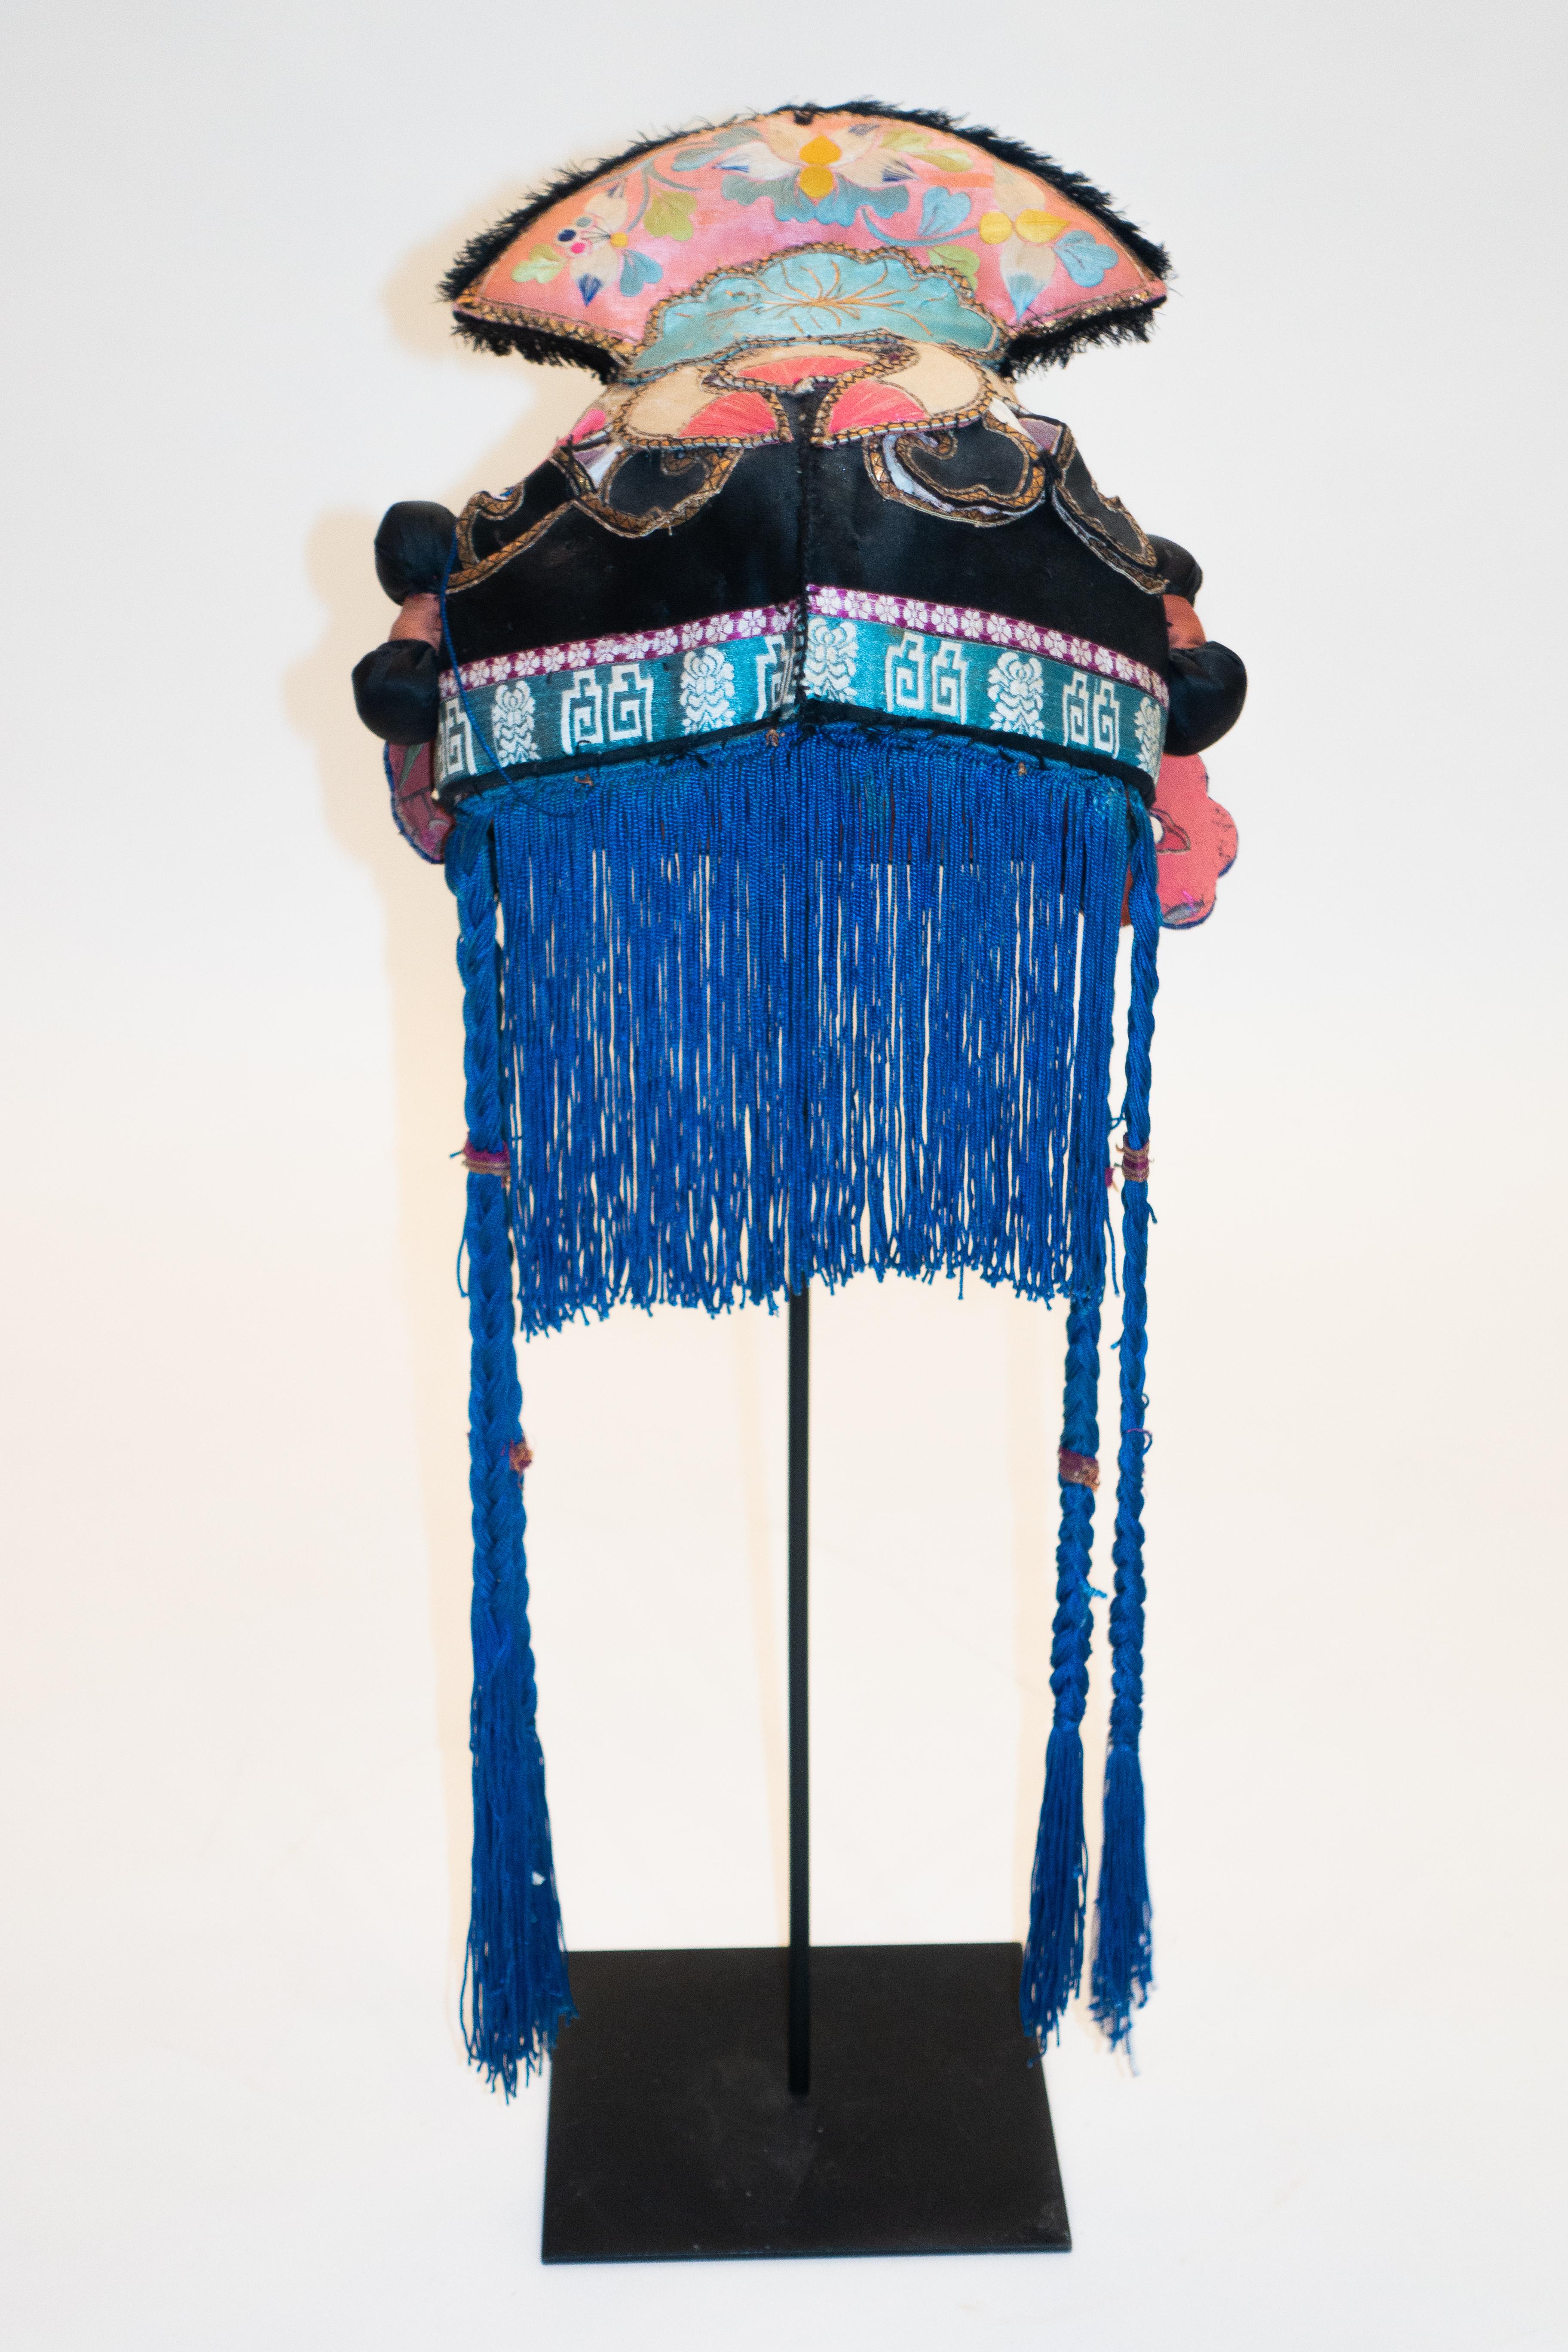 Hand embroidered silk Miao minority tribe child's headdress with inset mirrors and braided tassels from the early 20th century on a custom black painted metal mount.